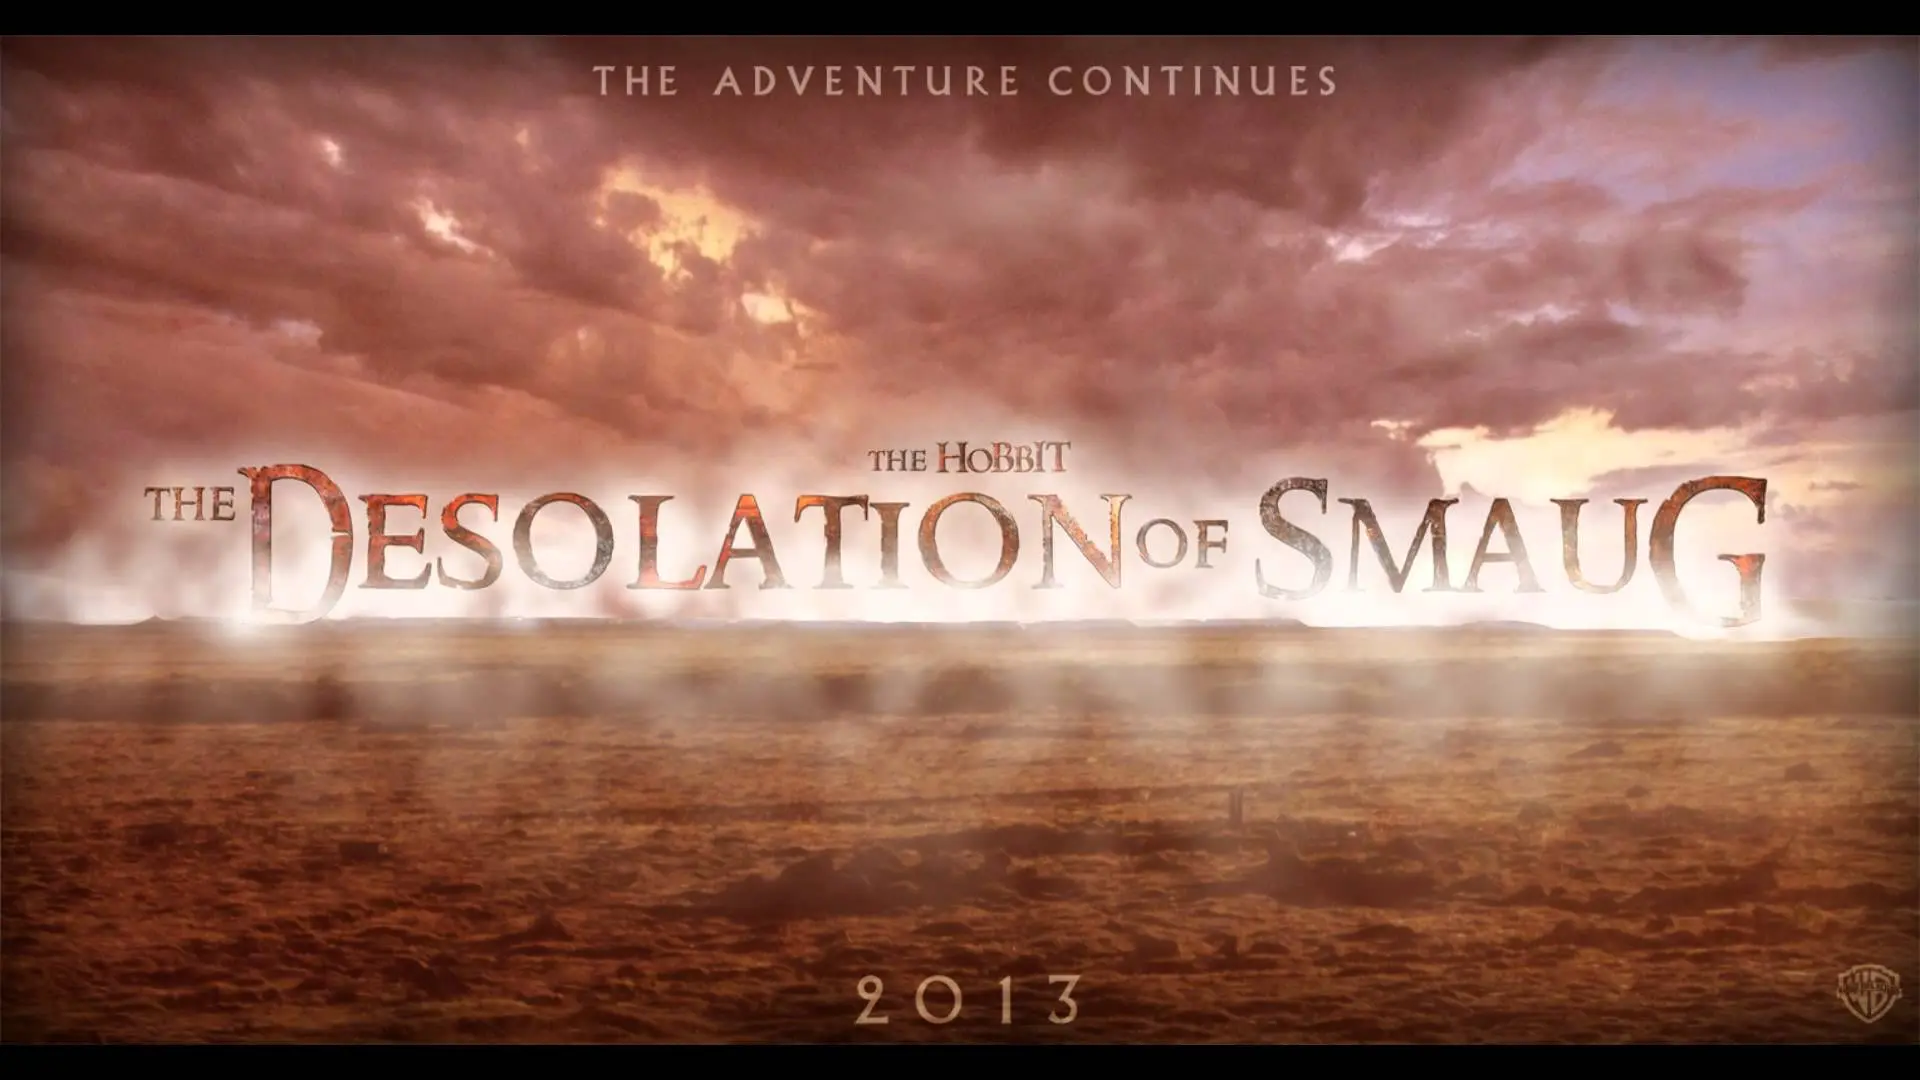 Movie The Hobbit the Desolation of Smaug wallpaper 4 | Background Image